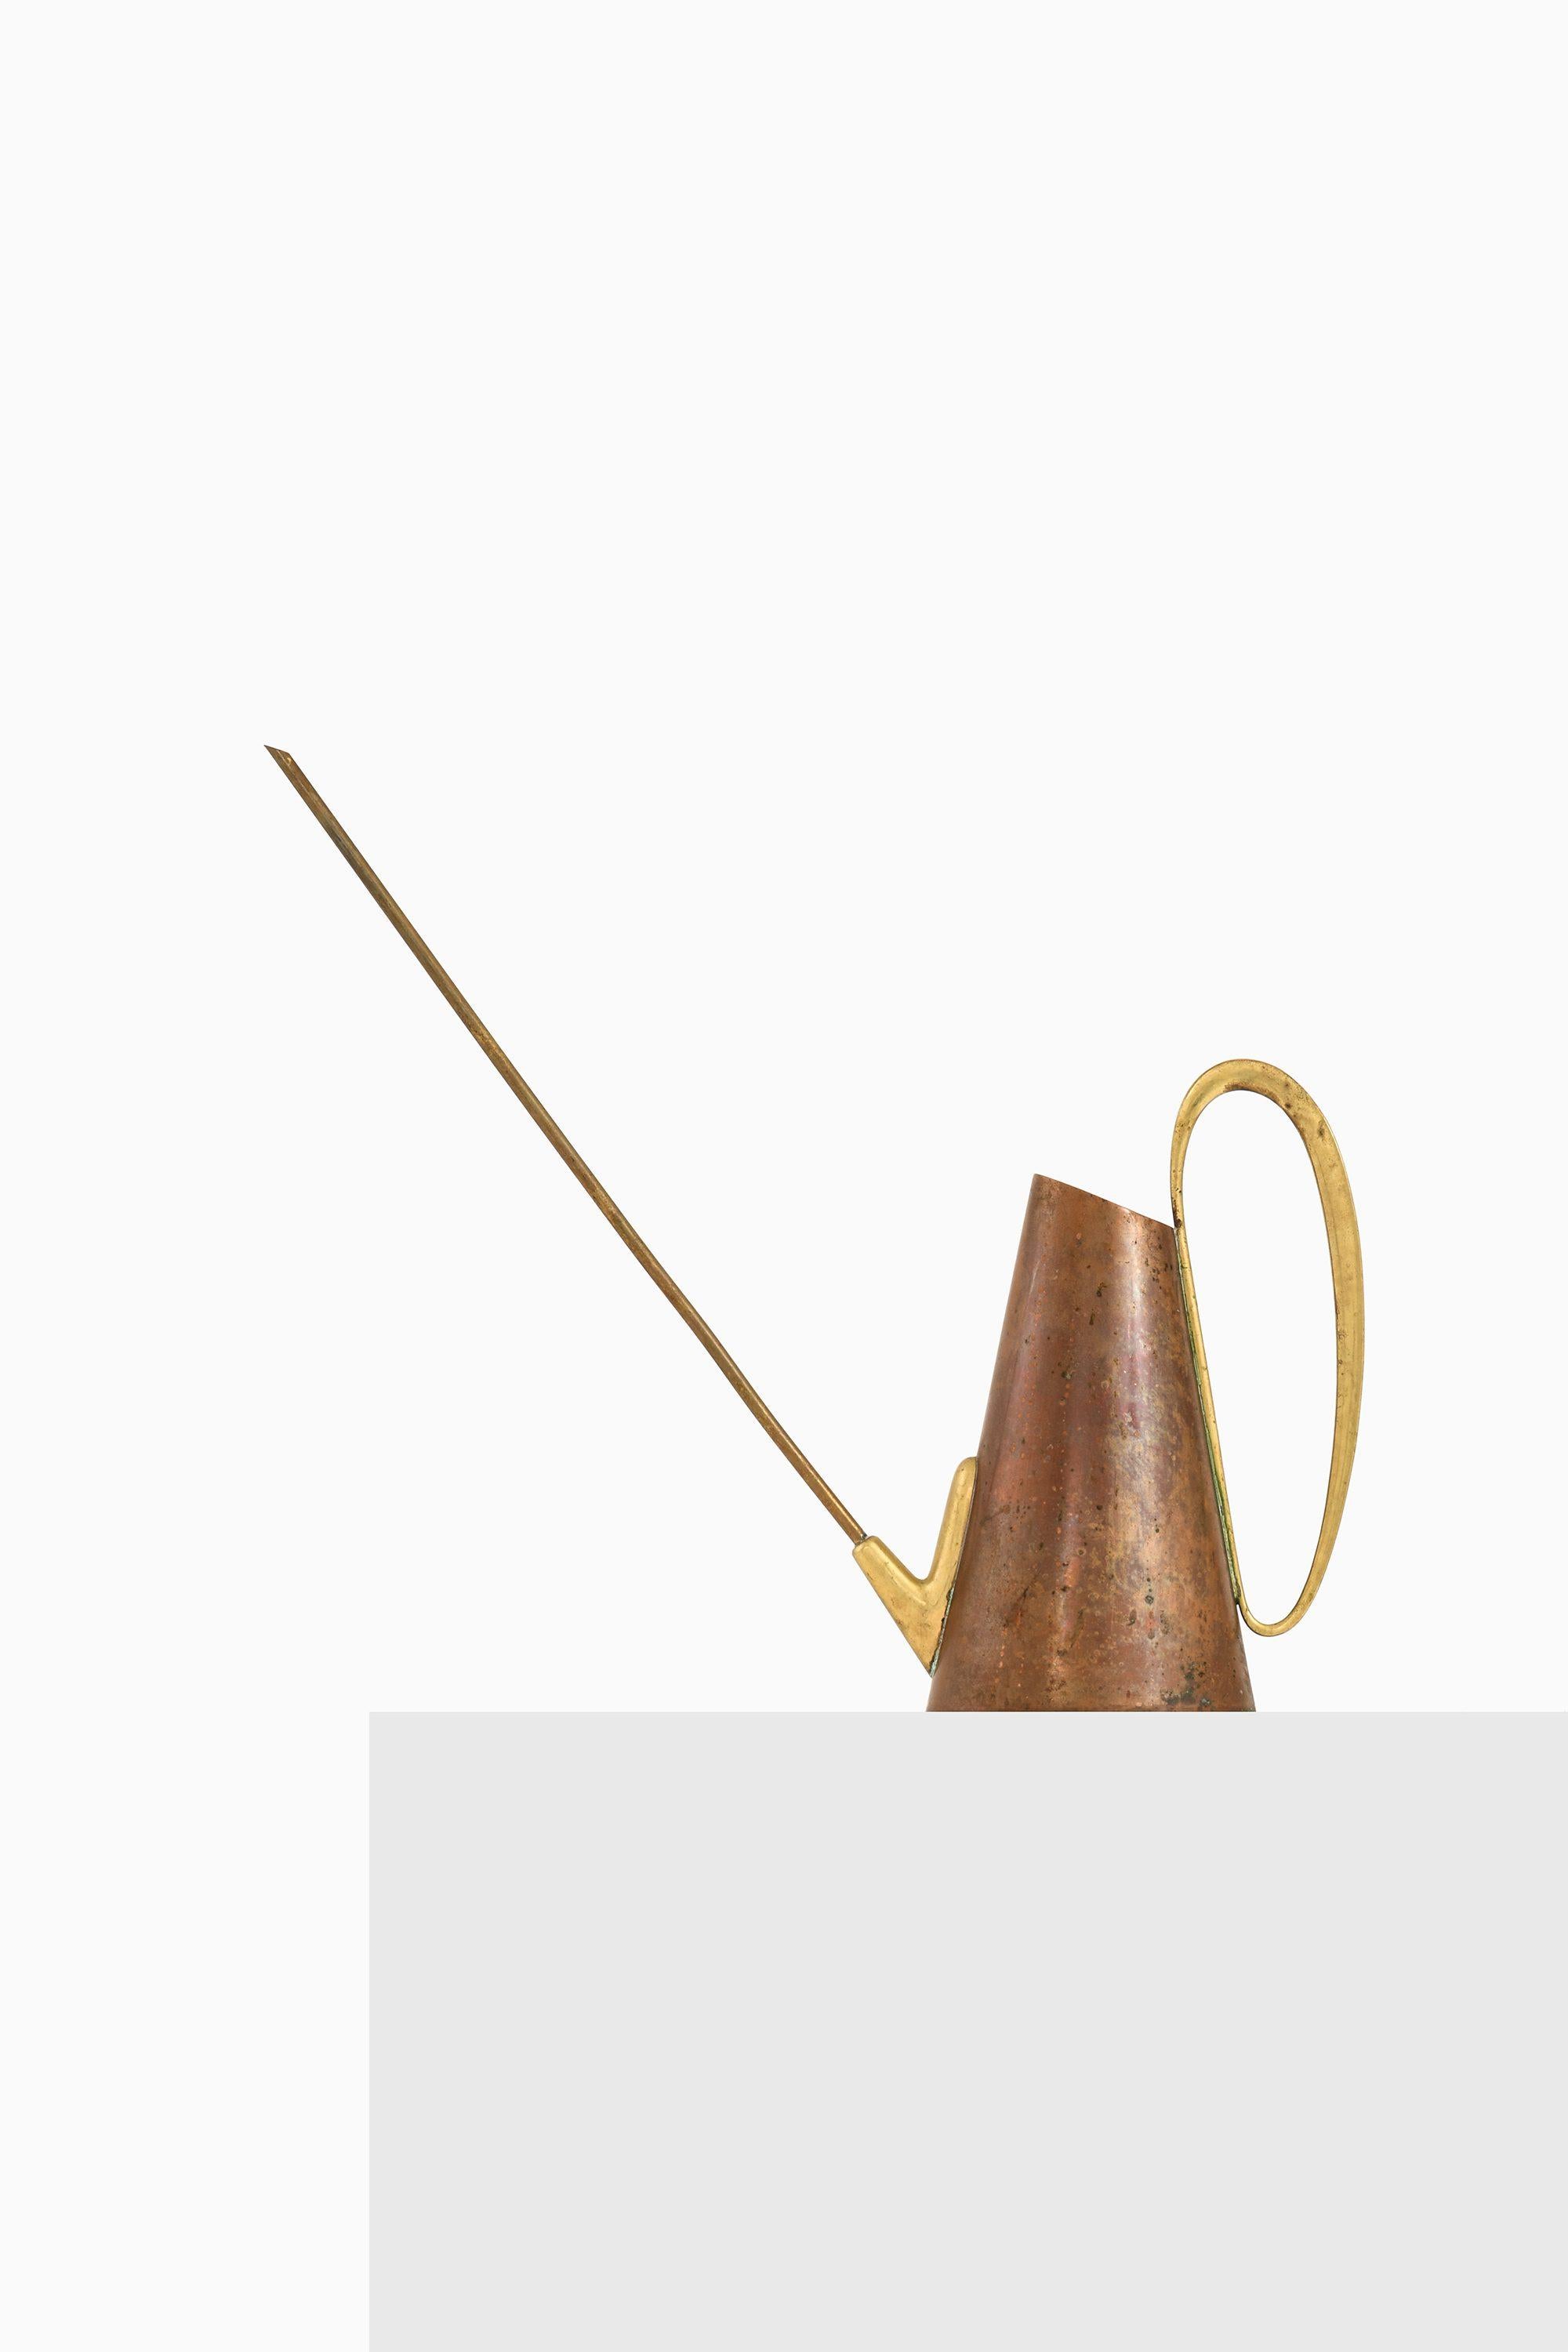 Watering Can in Brass and Copper by Carl Auböck, 1950's

Additional Information:
Material: Brass and copper
Style: Mid century, Scandinavia
Produced in Denmark by Illums Bolighus
Dimensions (W x D x H): 45 x 11 x 38 cm
Condition: Good vintage